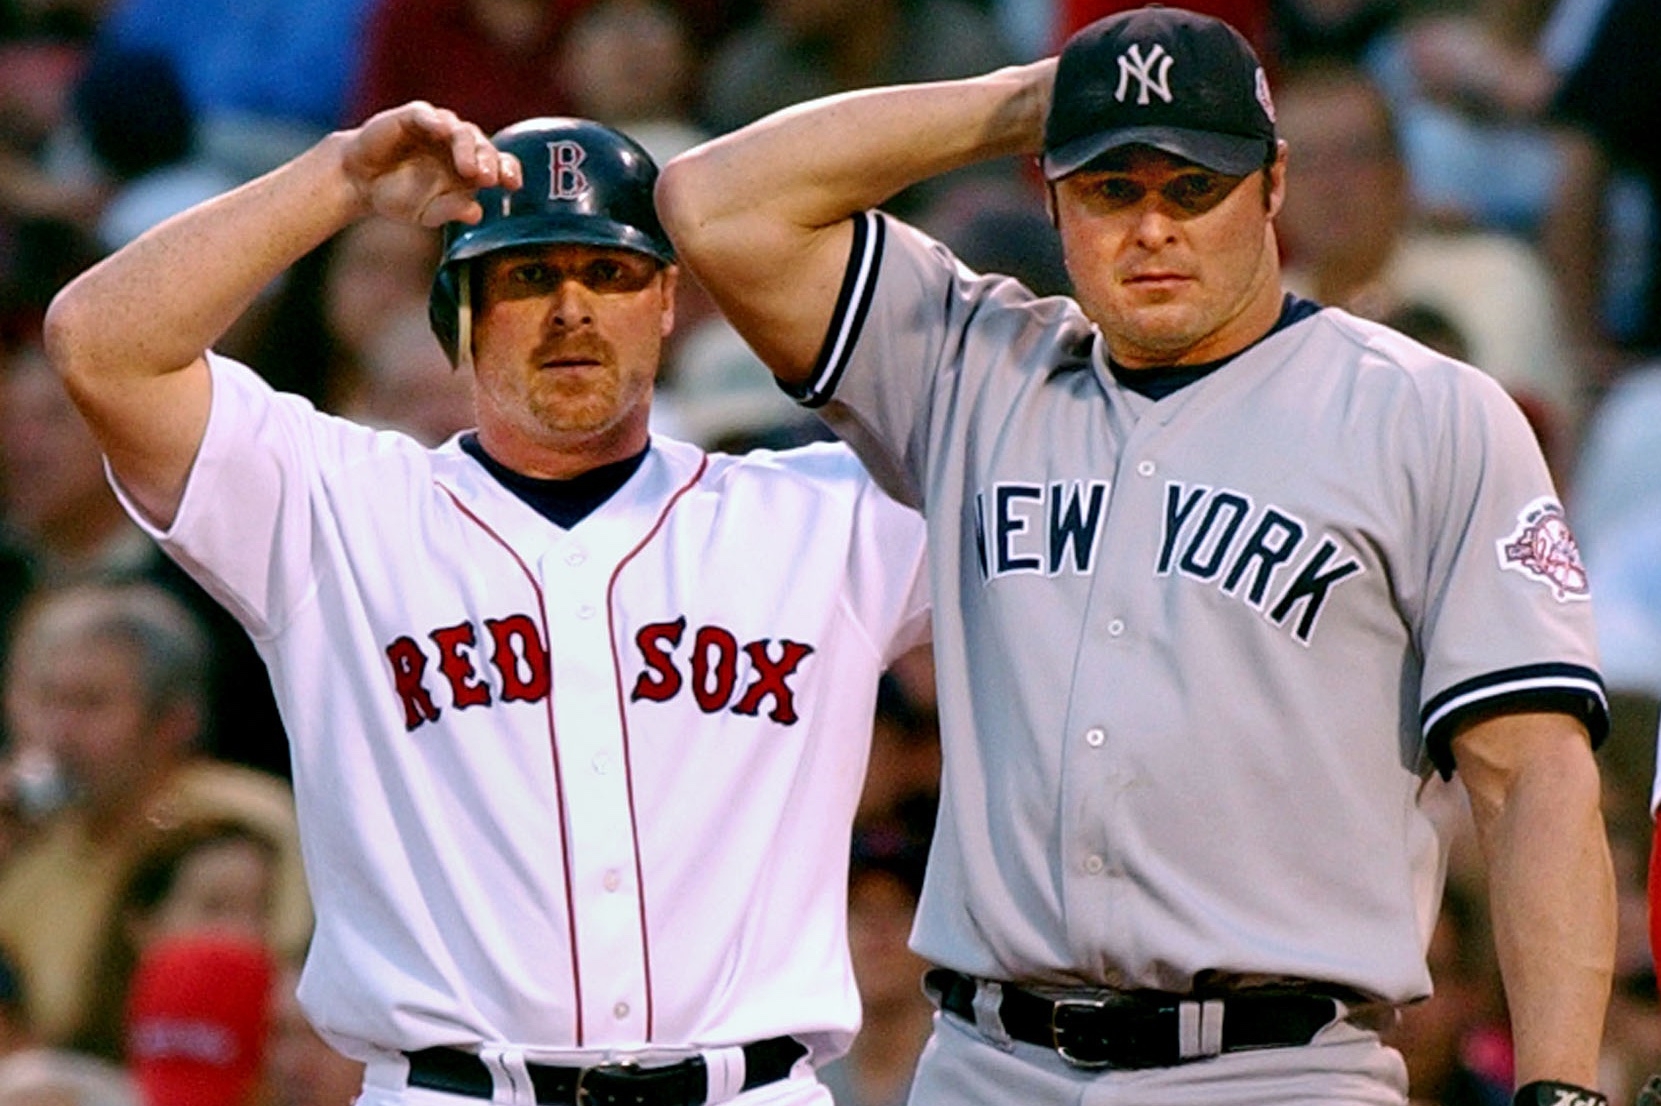 Former MLB star Jeremy Giambi died by suicide, medical examiner says